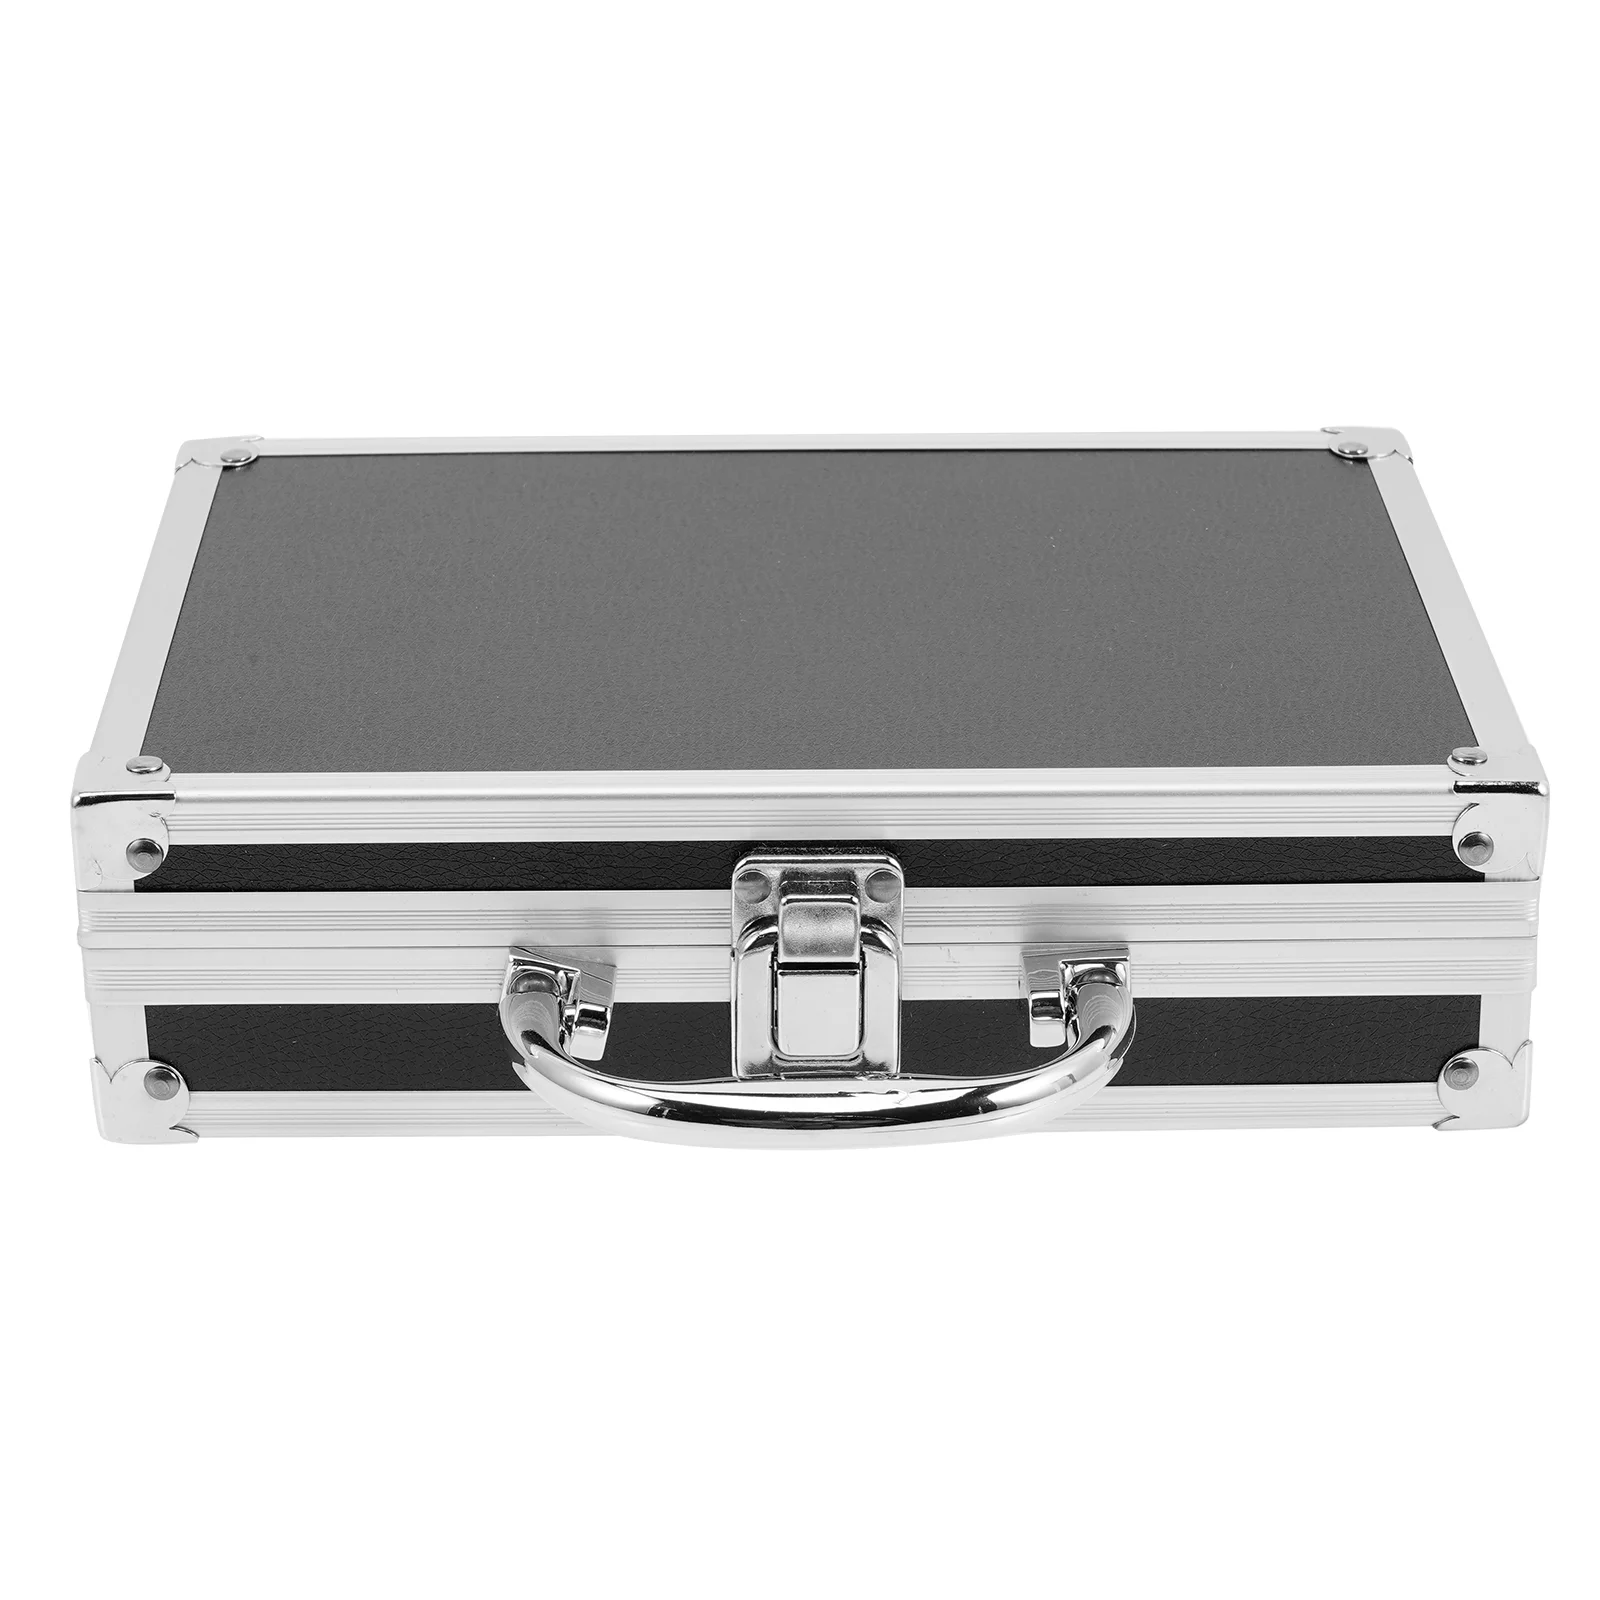 

Tools Boxes Carrying Case Portable Containers First Aid Metal Medicine Aluminum Toolbox